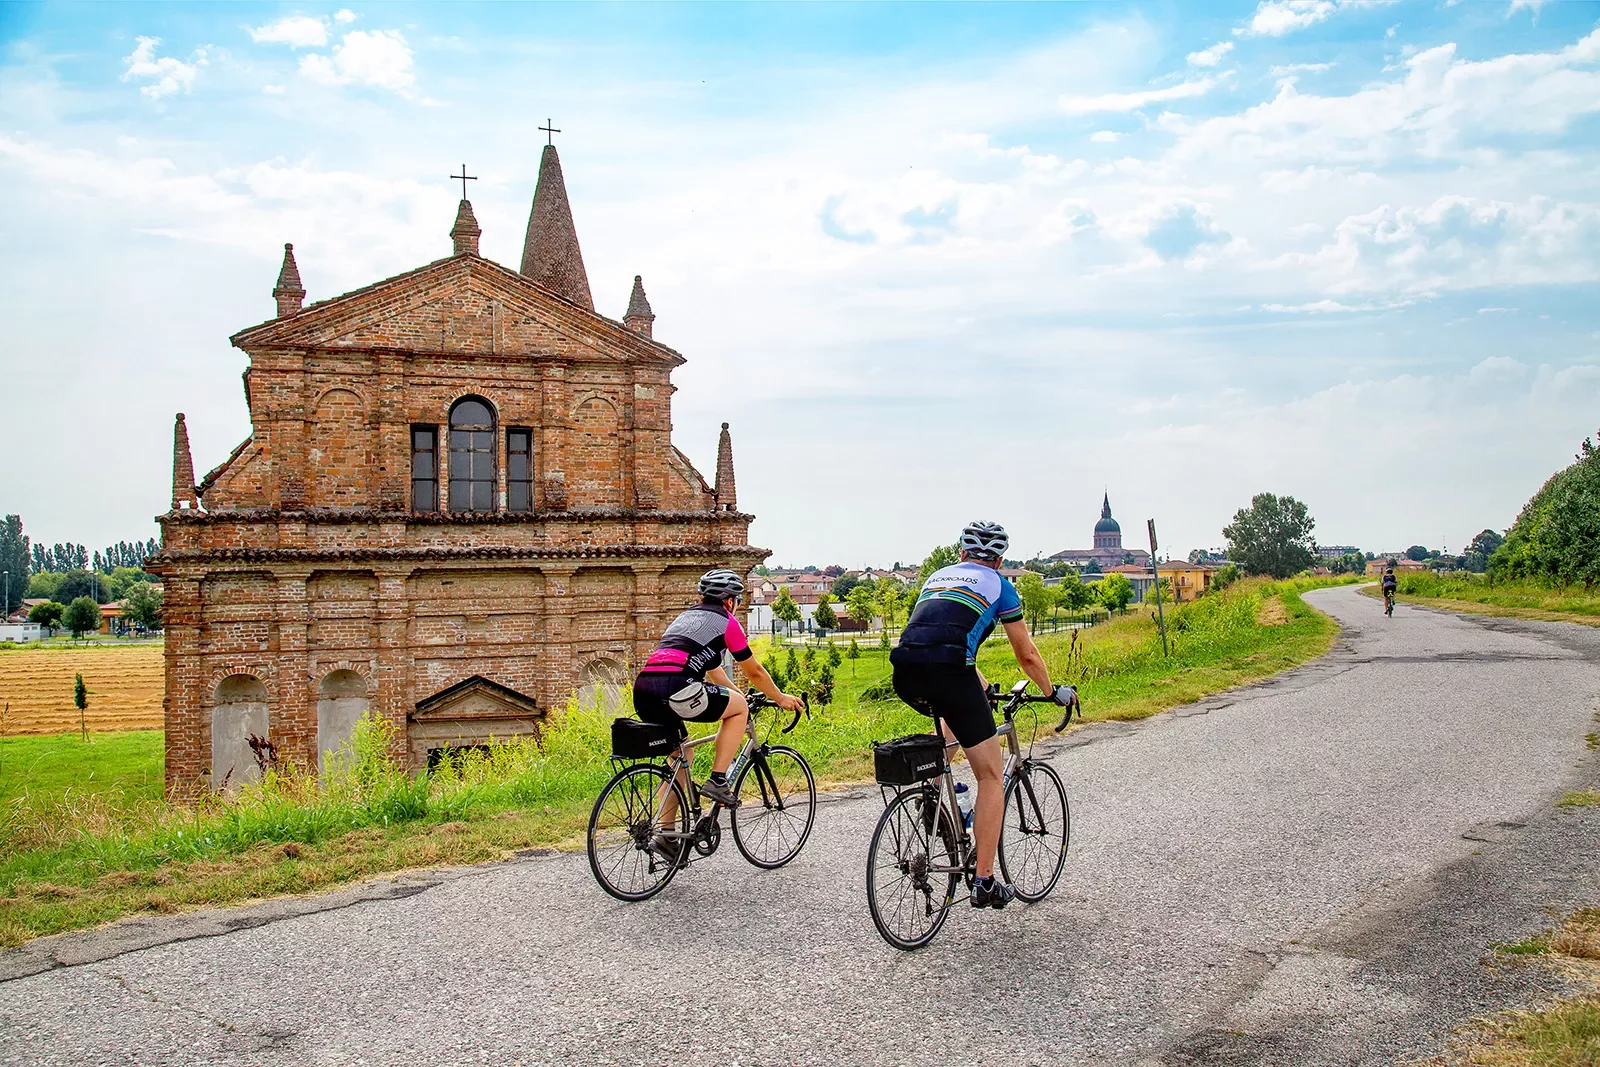 Cyclists riding along an Italian road with an old church building